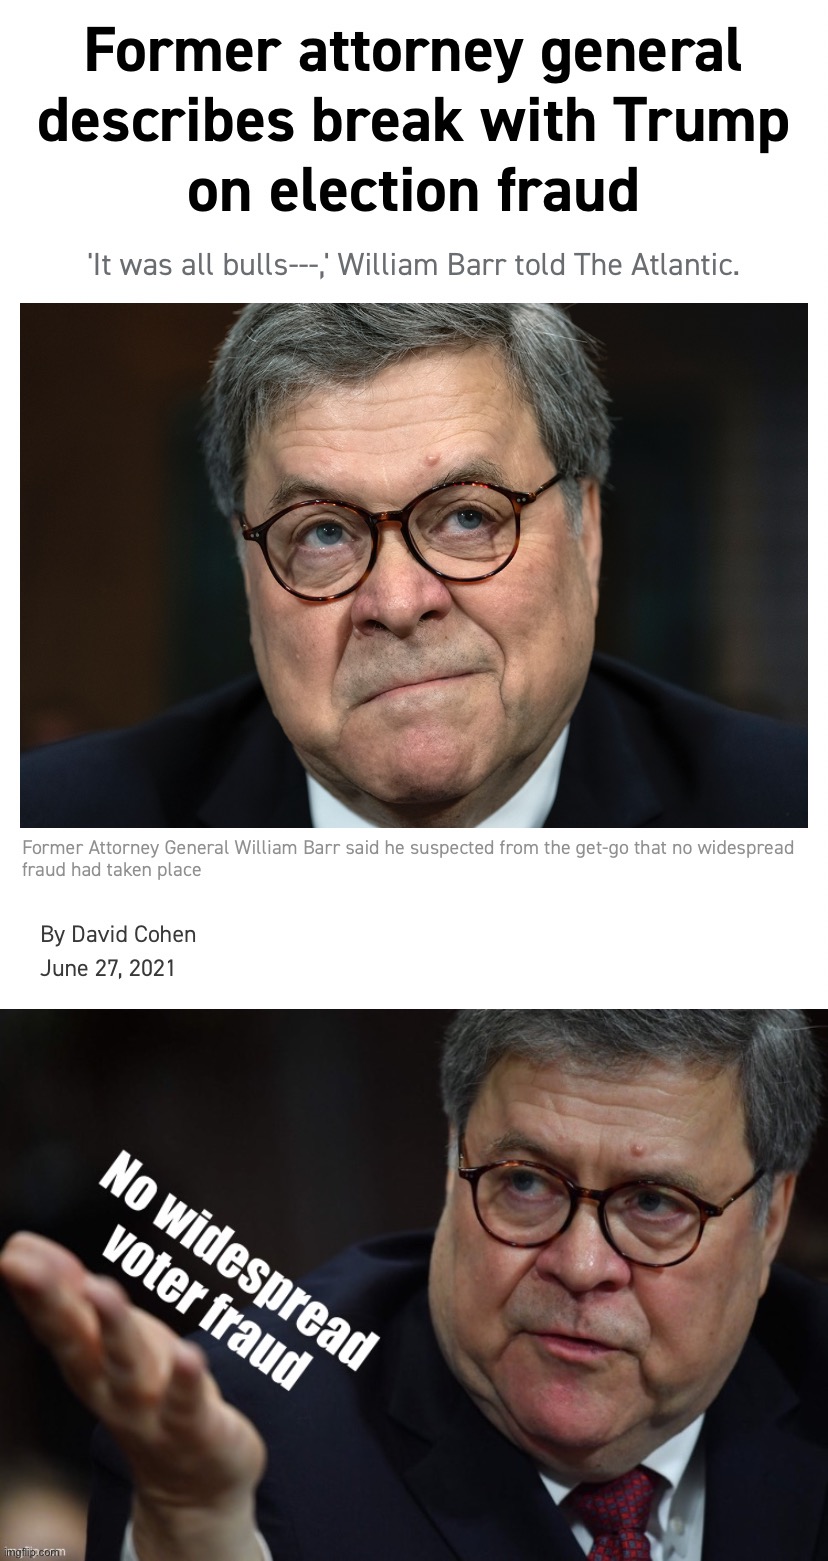 “It was all bullshit” why thank you, William Barr | image tagged in william barr it was all bullshit,barr no widespread voter fraud,voter fraud,election fraud,the big lie,william barr | made w/ Imgflip meme maker